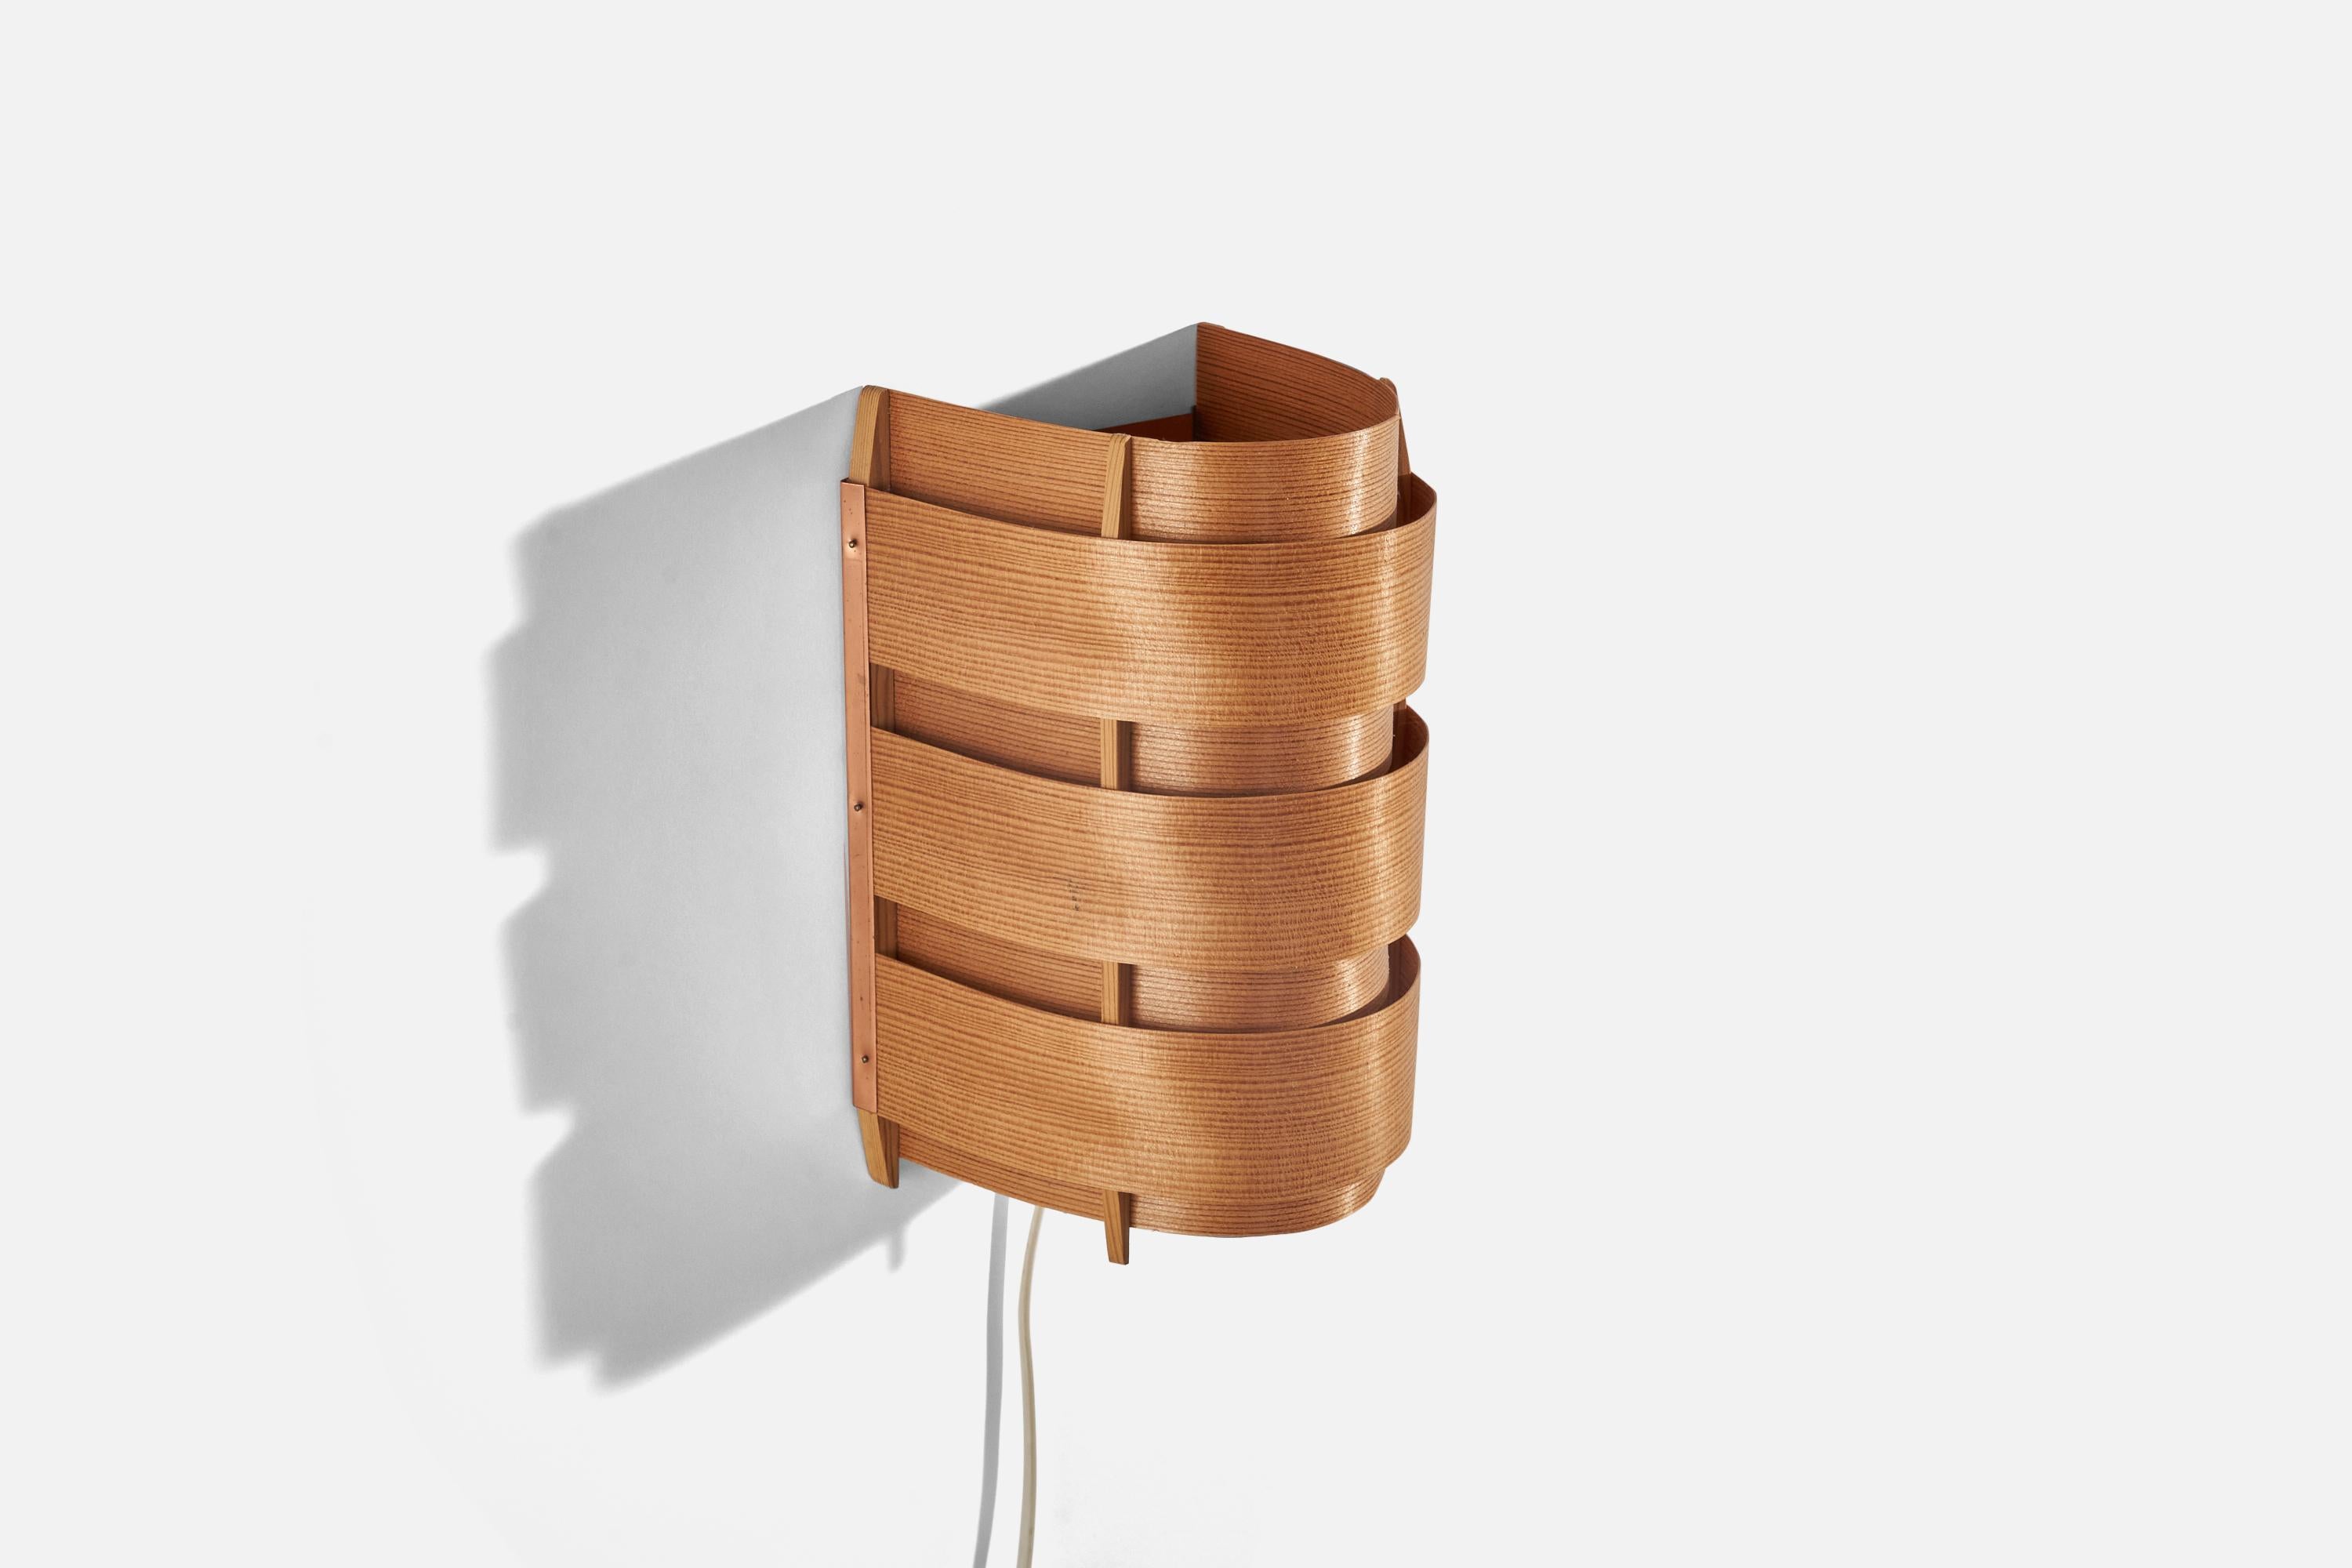 A pine and moulded pine veneer sconce / wall light designed and produced by Hans-Agne Jakobsson, Sweden. c. 1970s.

Dimensions of Back Plate (inches) : 8.68 x 6.75 x 0.01 (Height x Width x Depth).

Socket takes standard E-26 medium base